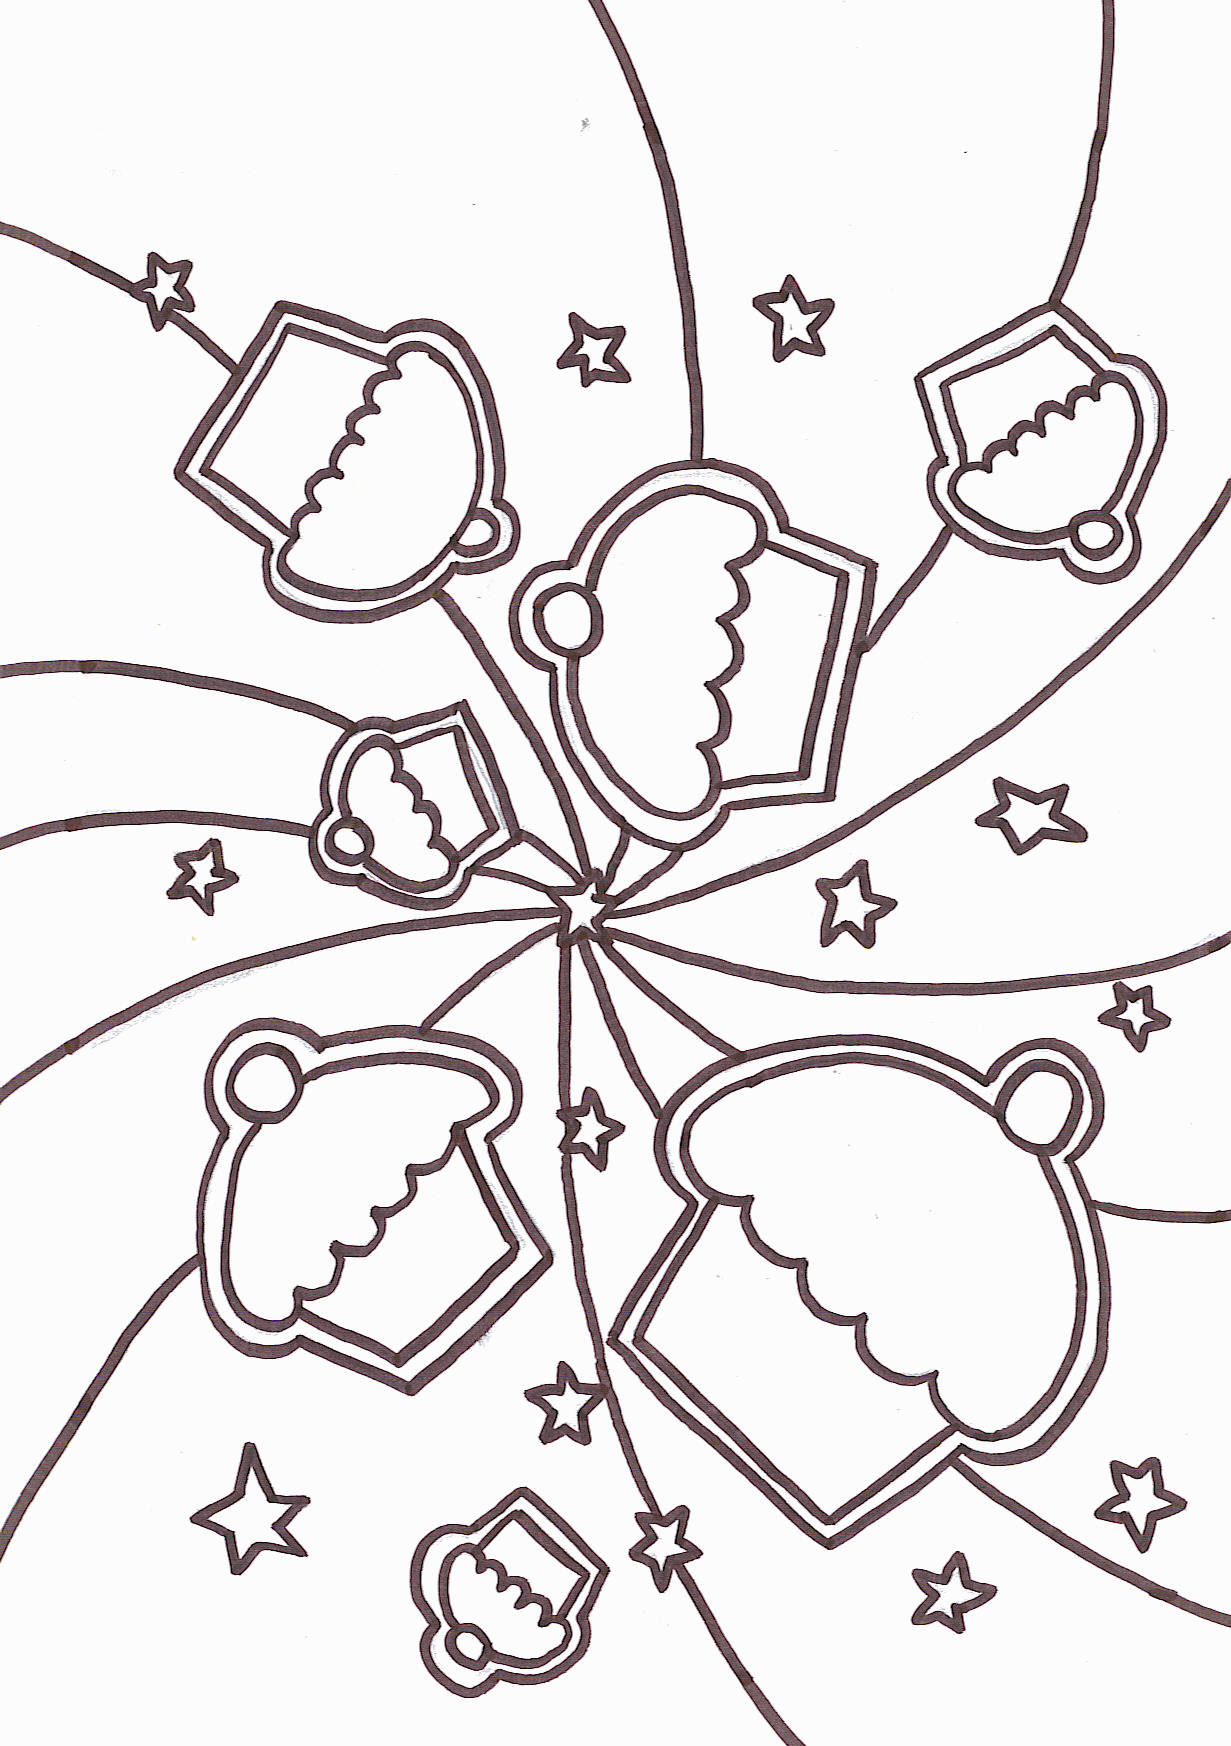 Cupcake Coloring Page - Coloring Pages for Kids and for Adults